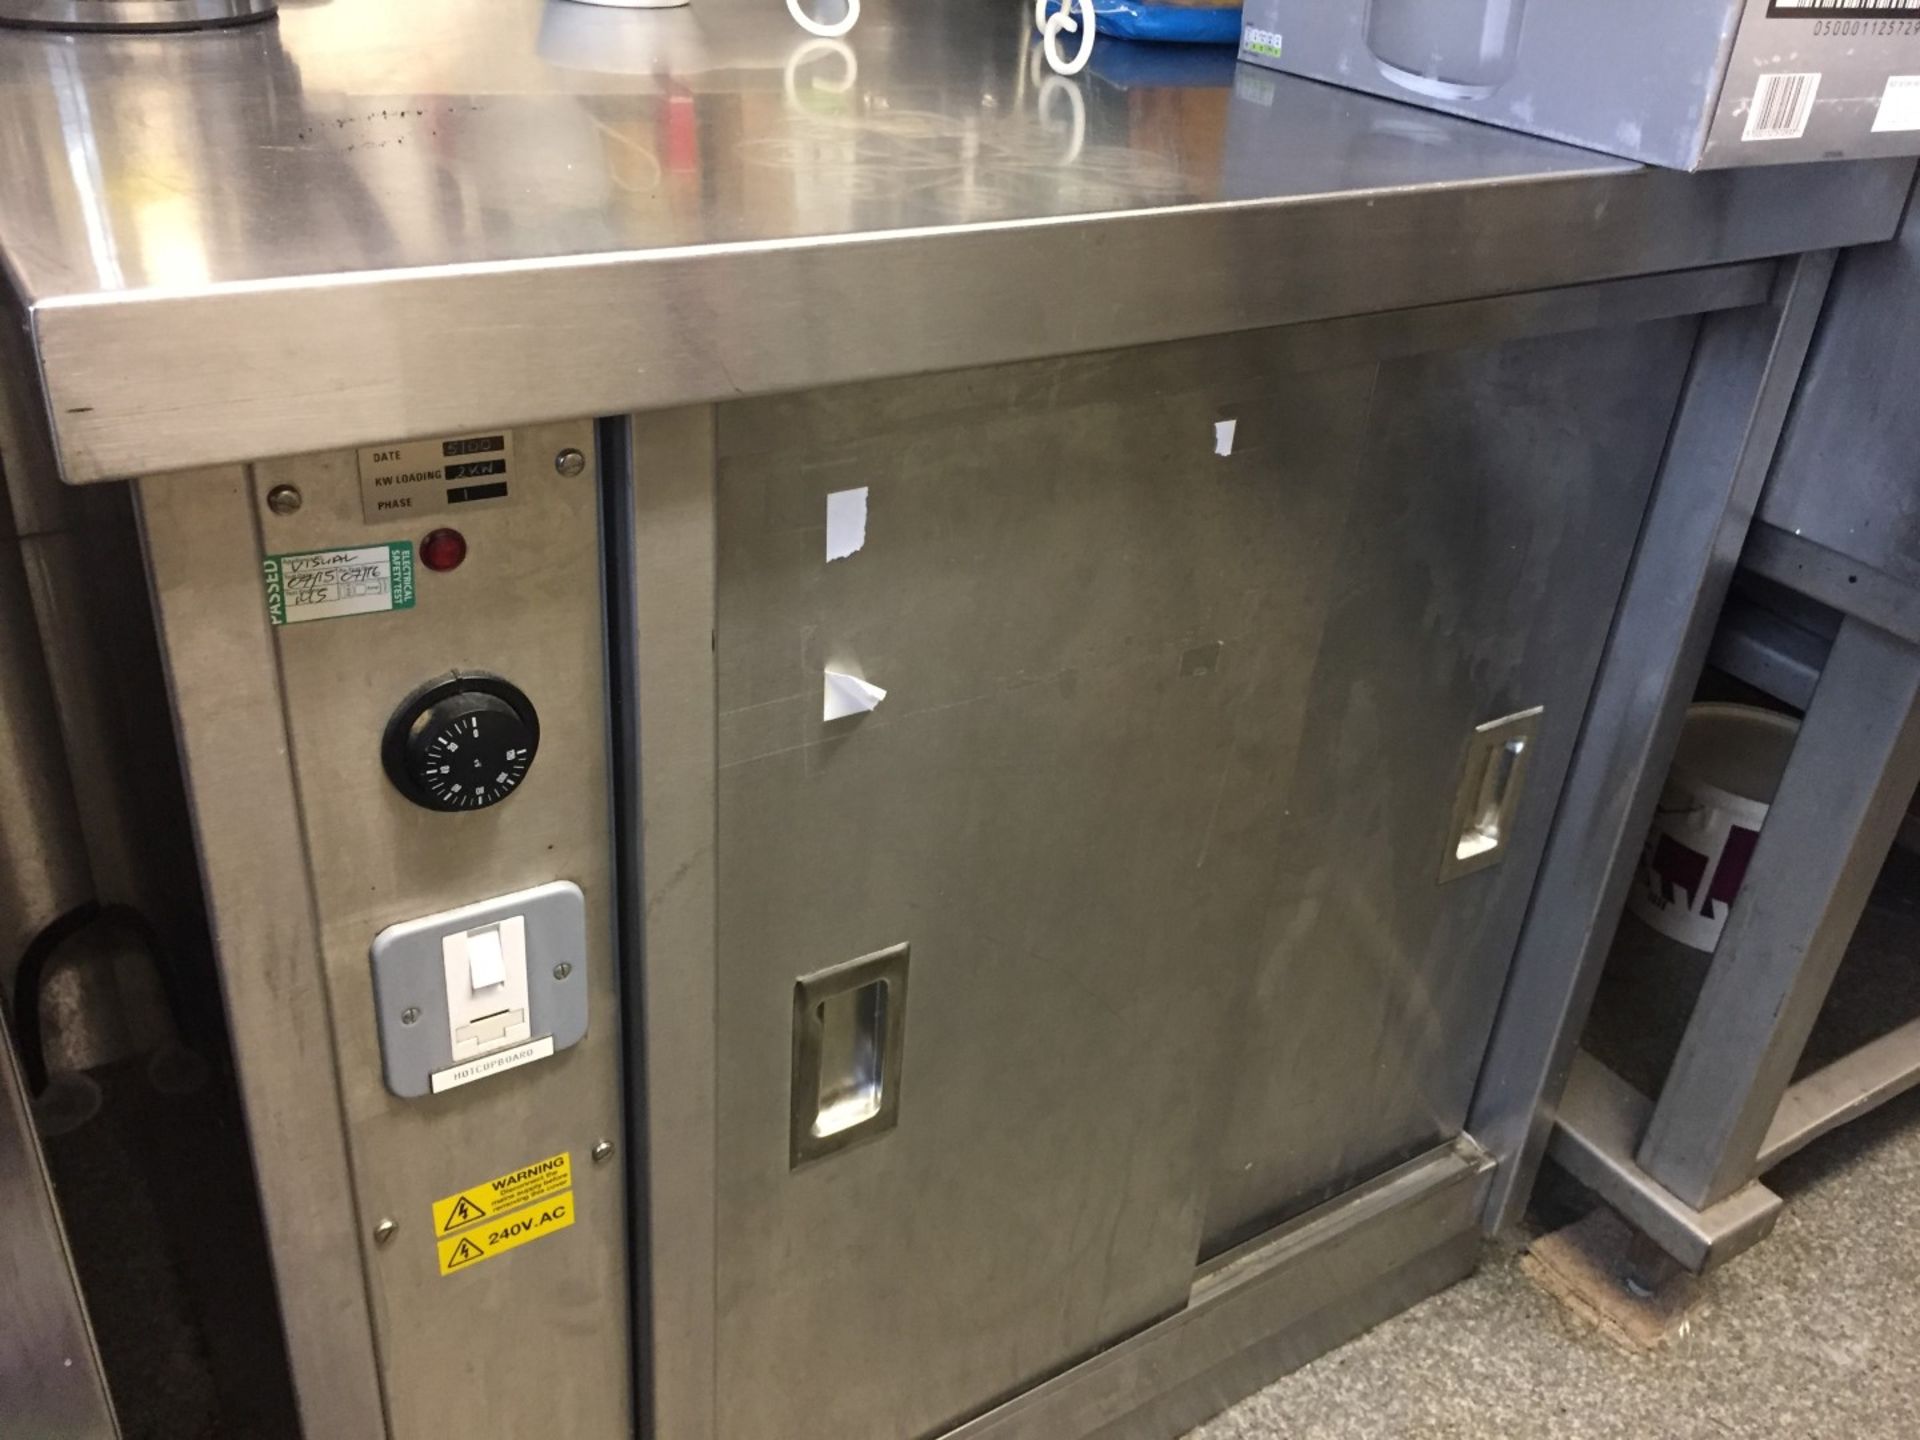 1 x Stainless Steel Commercial Hot Cupboard - Dimensions: W90 x D55 x H90cm - CL191 - Location: